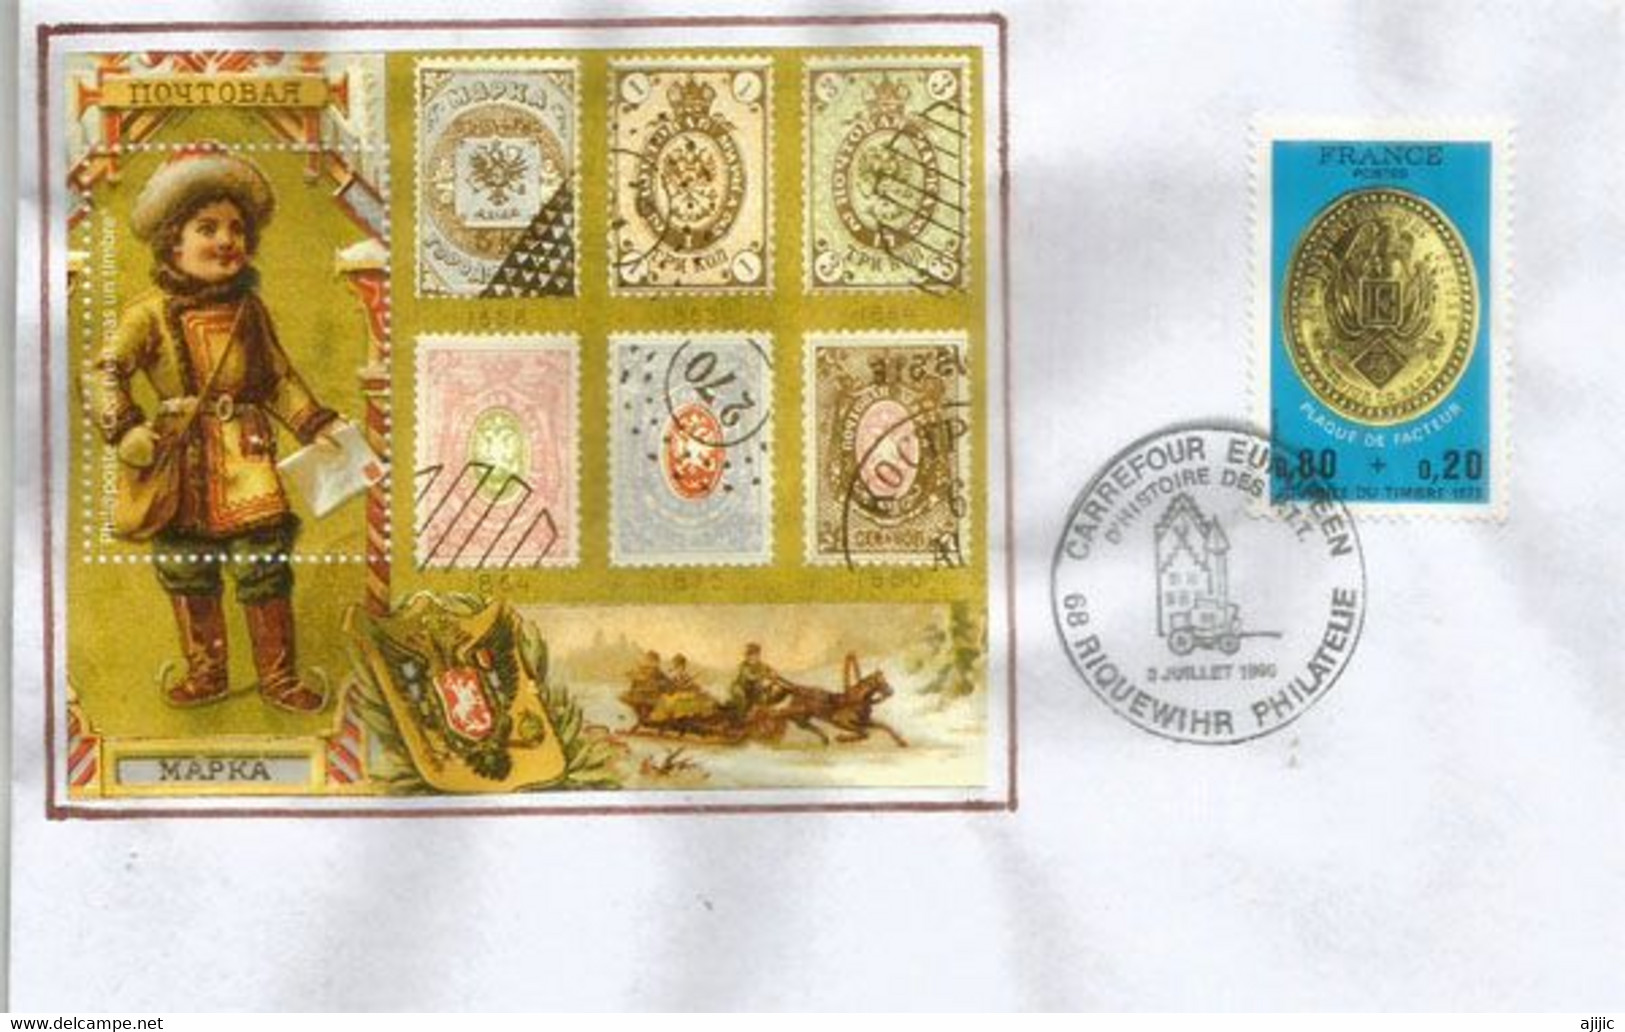 Postal Service History France With The Russian Empire, On Cover "Carrefour Europeen" Riquewihr. France. (Vignette) - Variedades & Curiosidades